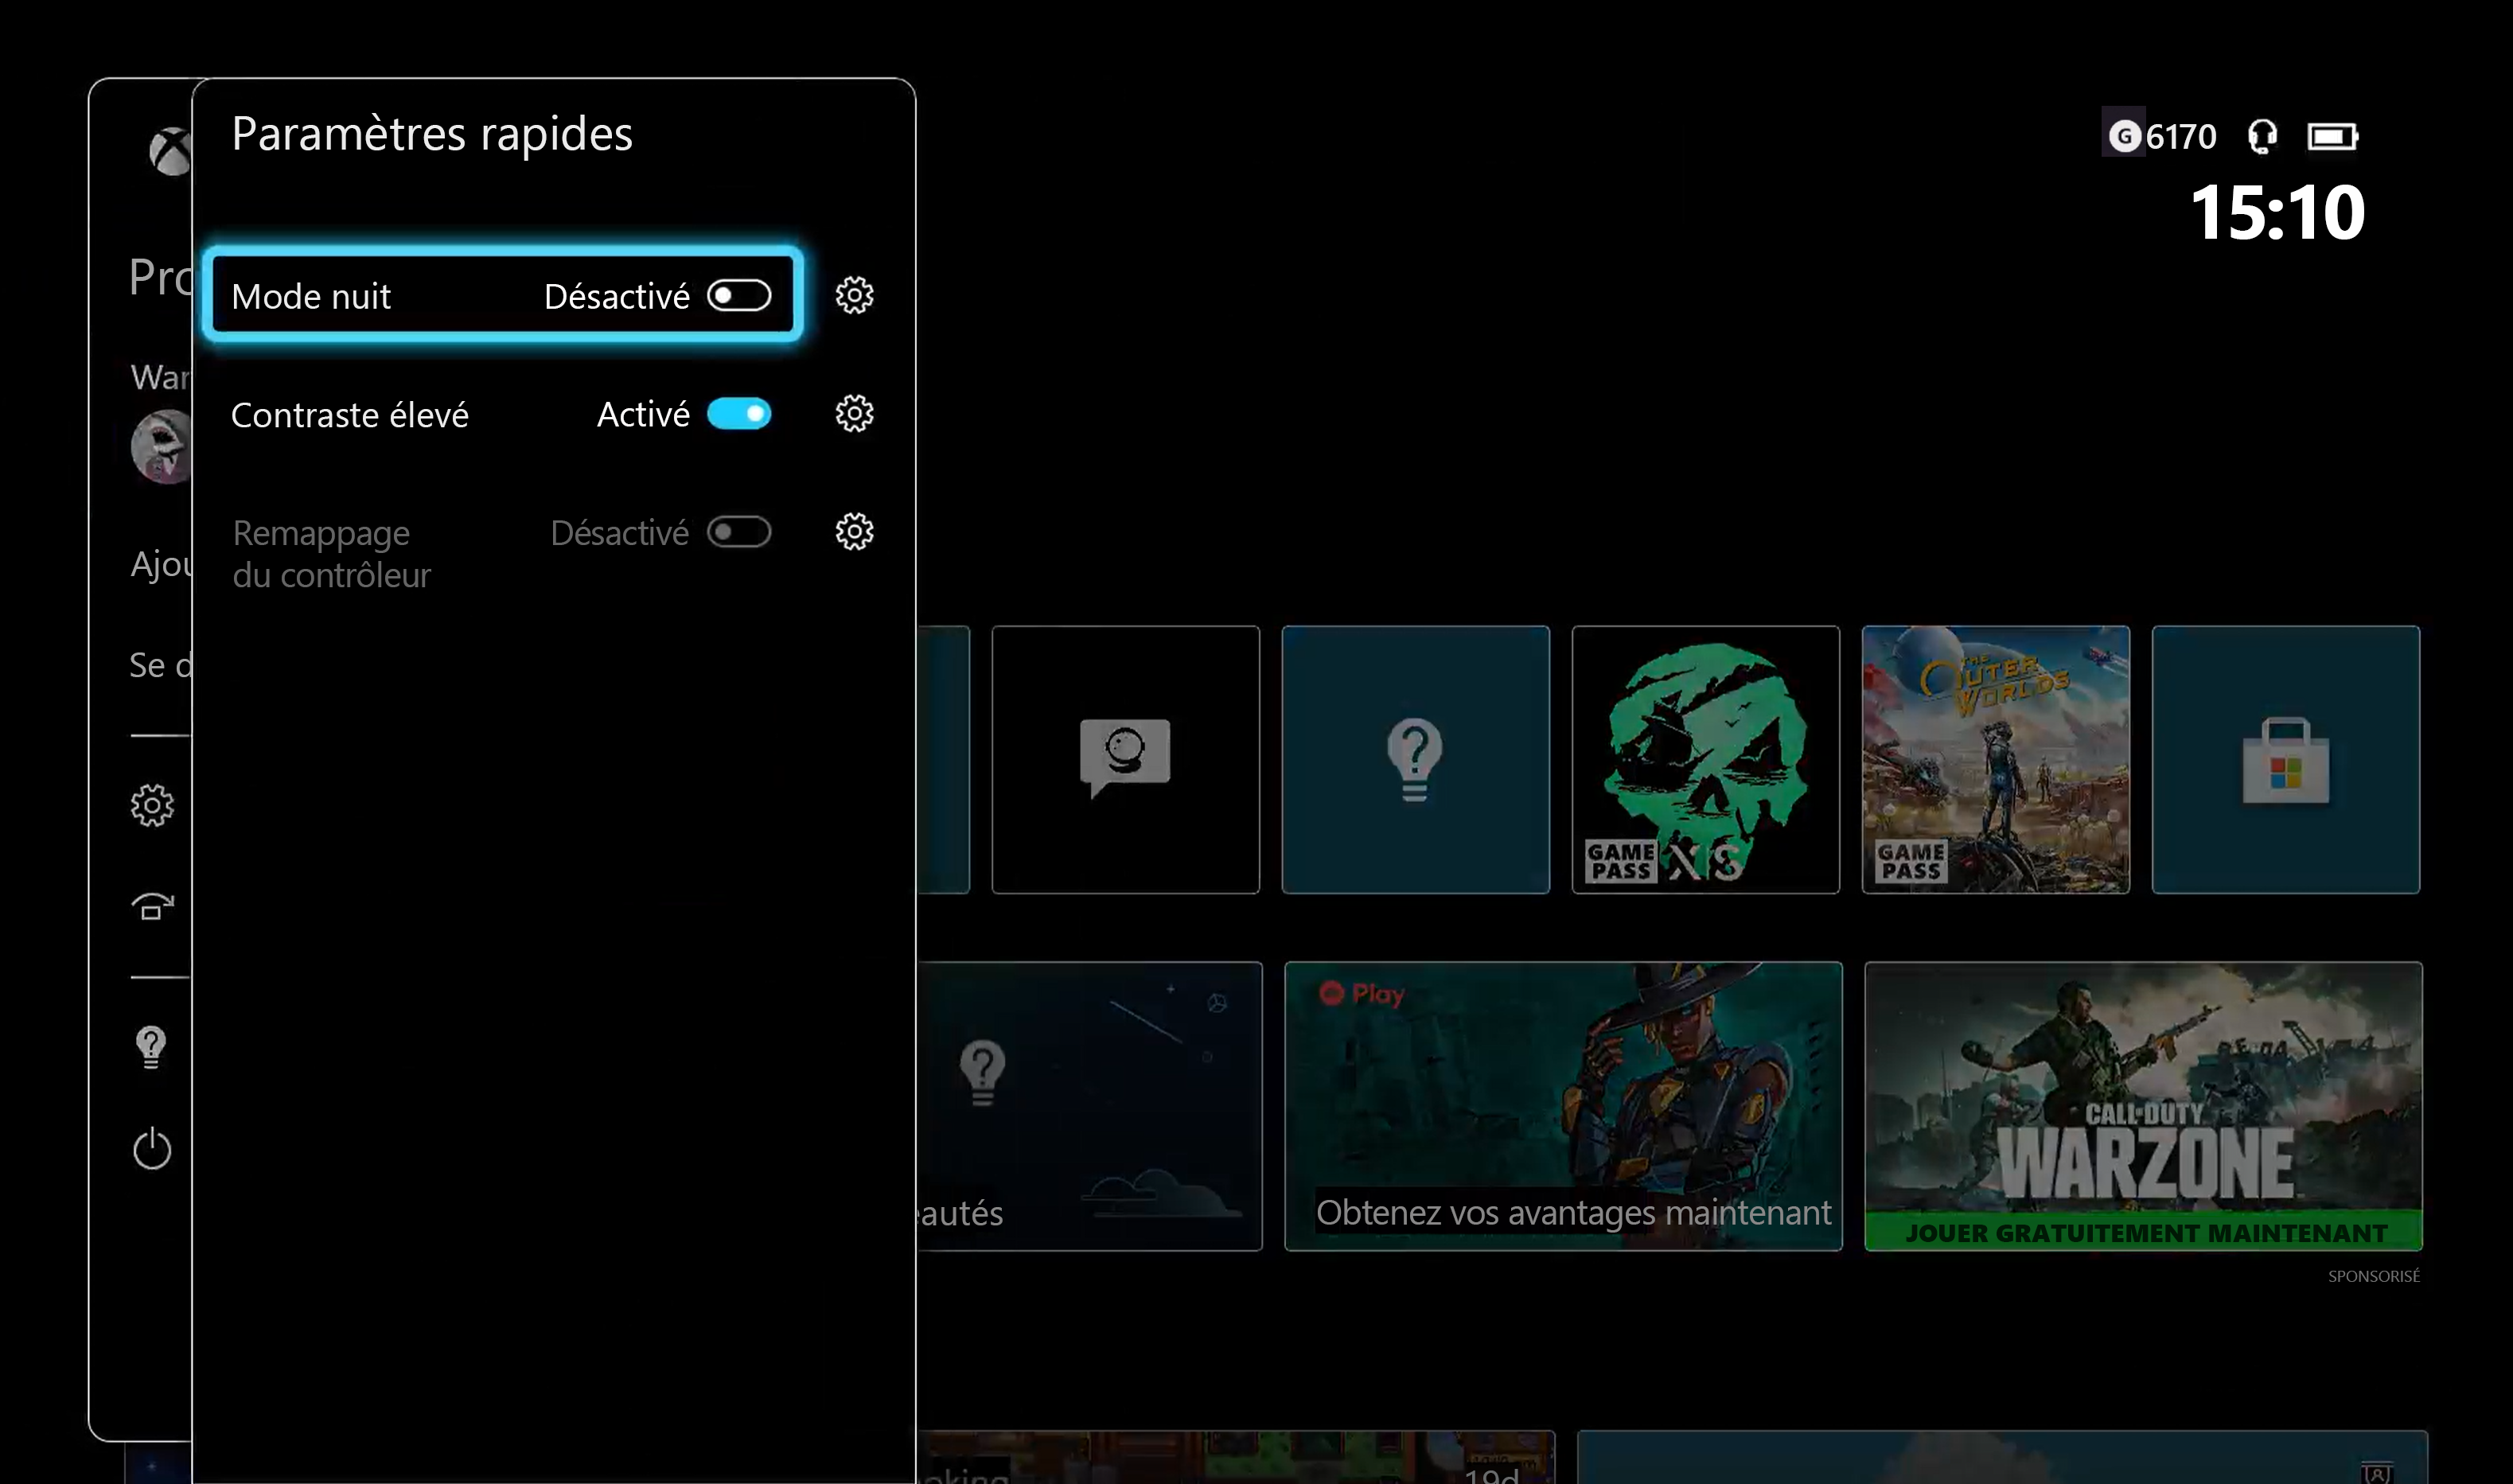 Screenshot that shows the Quick settings screen on Xbox. The Night mode setting is highlighted and turned off.